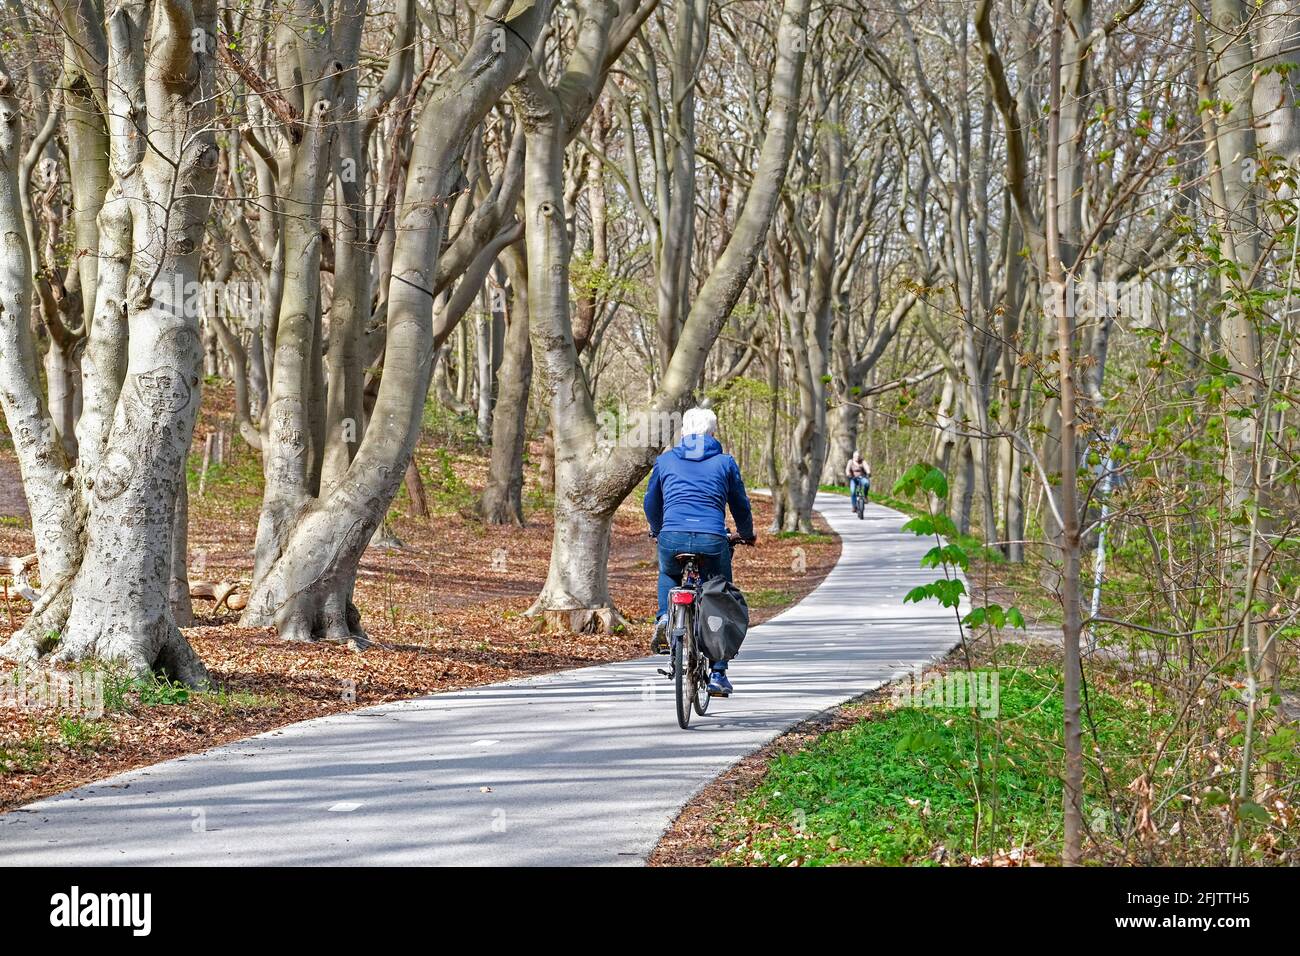 Dutch cyclists cycling on their bicycles on concrete cycle path / bicycle track winding through forest in spring near Alkmaar, North Holland / Noord-H Stock Photo